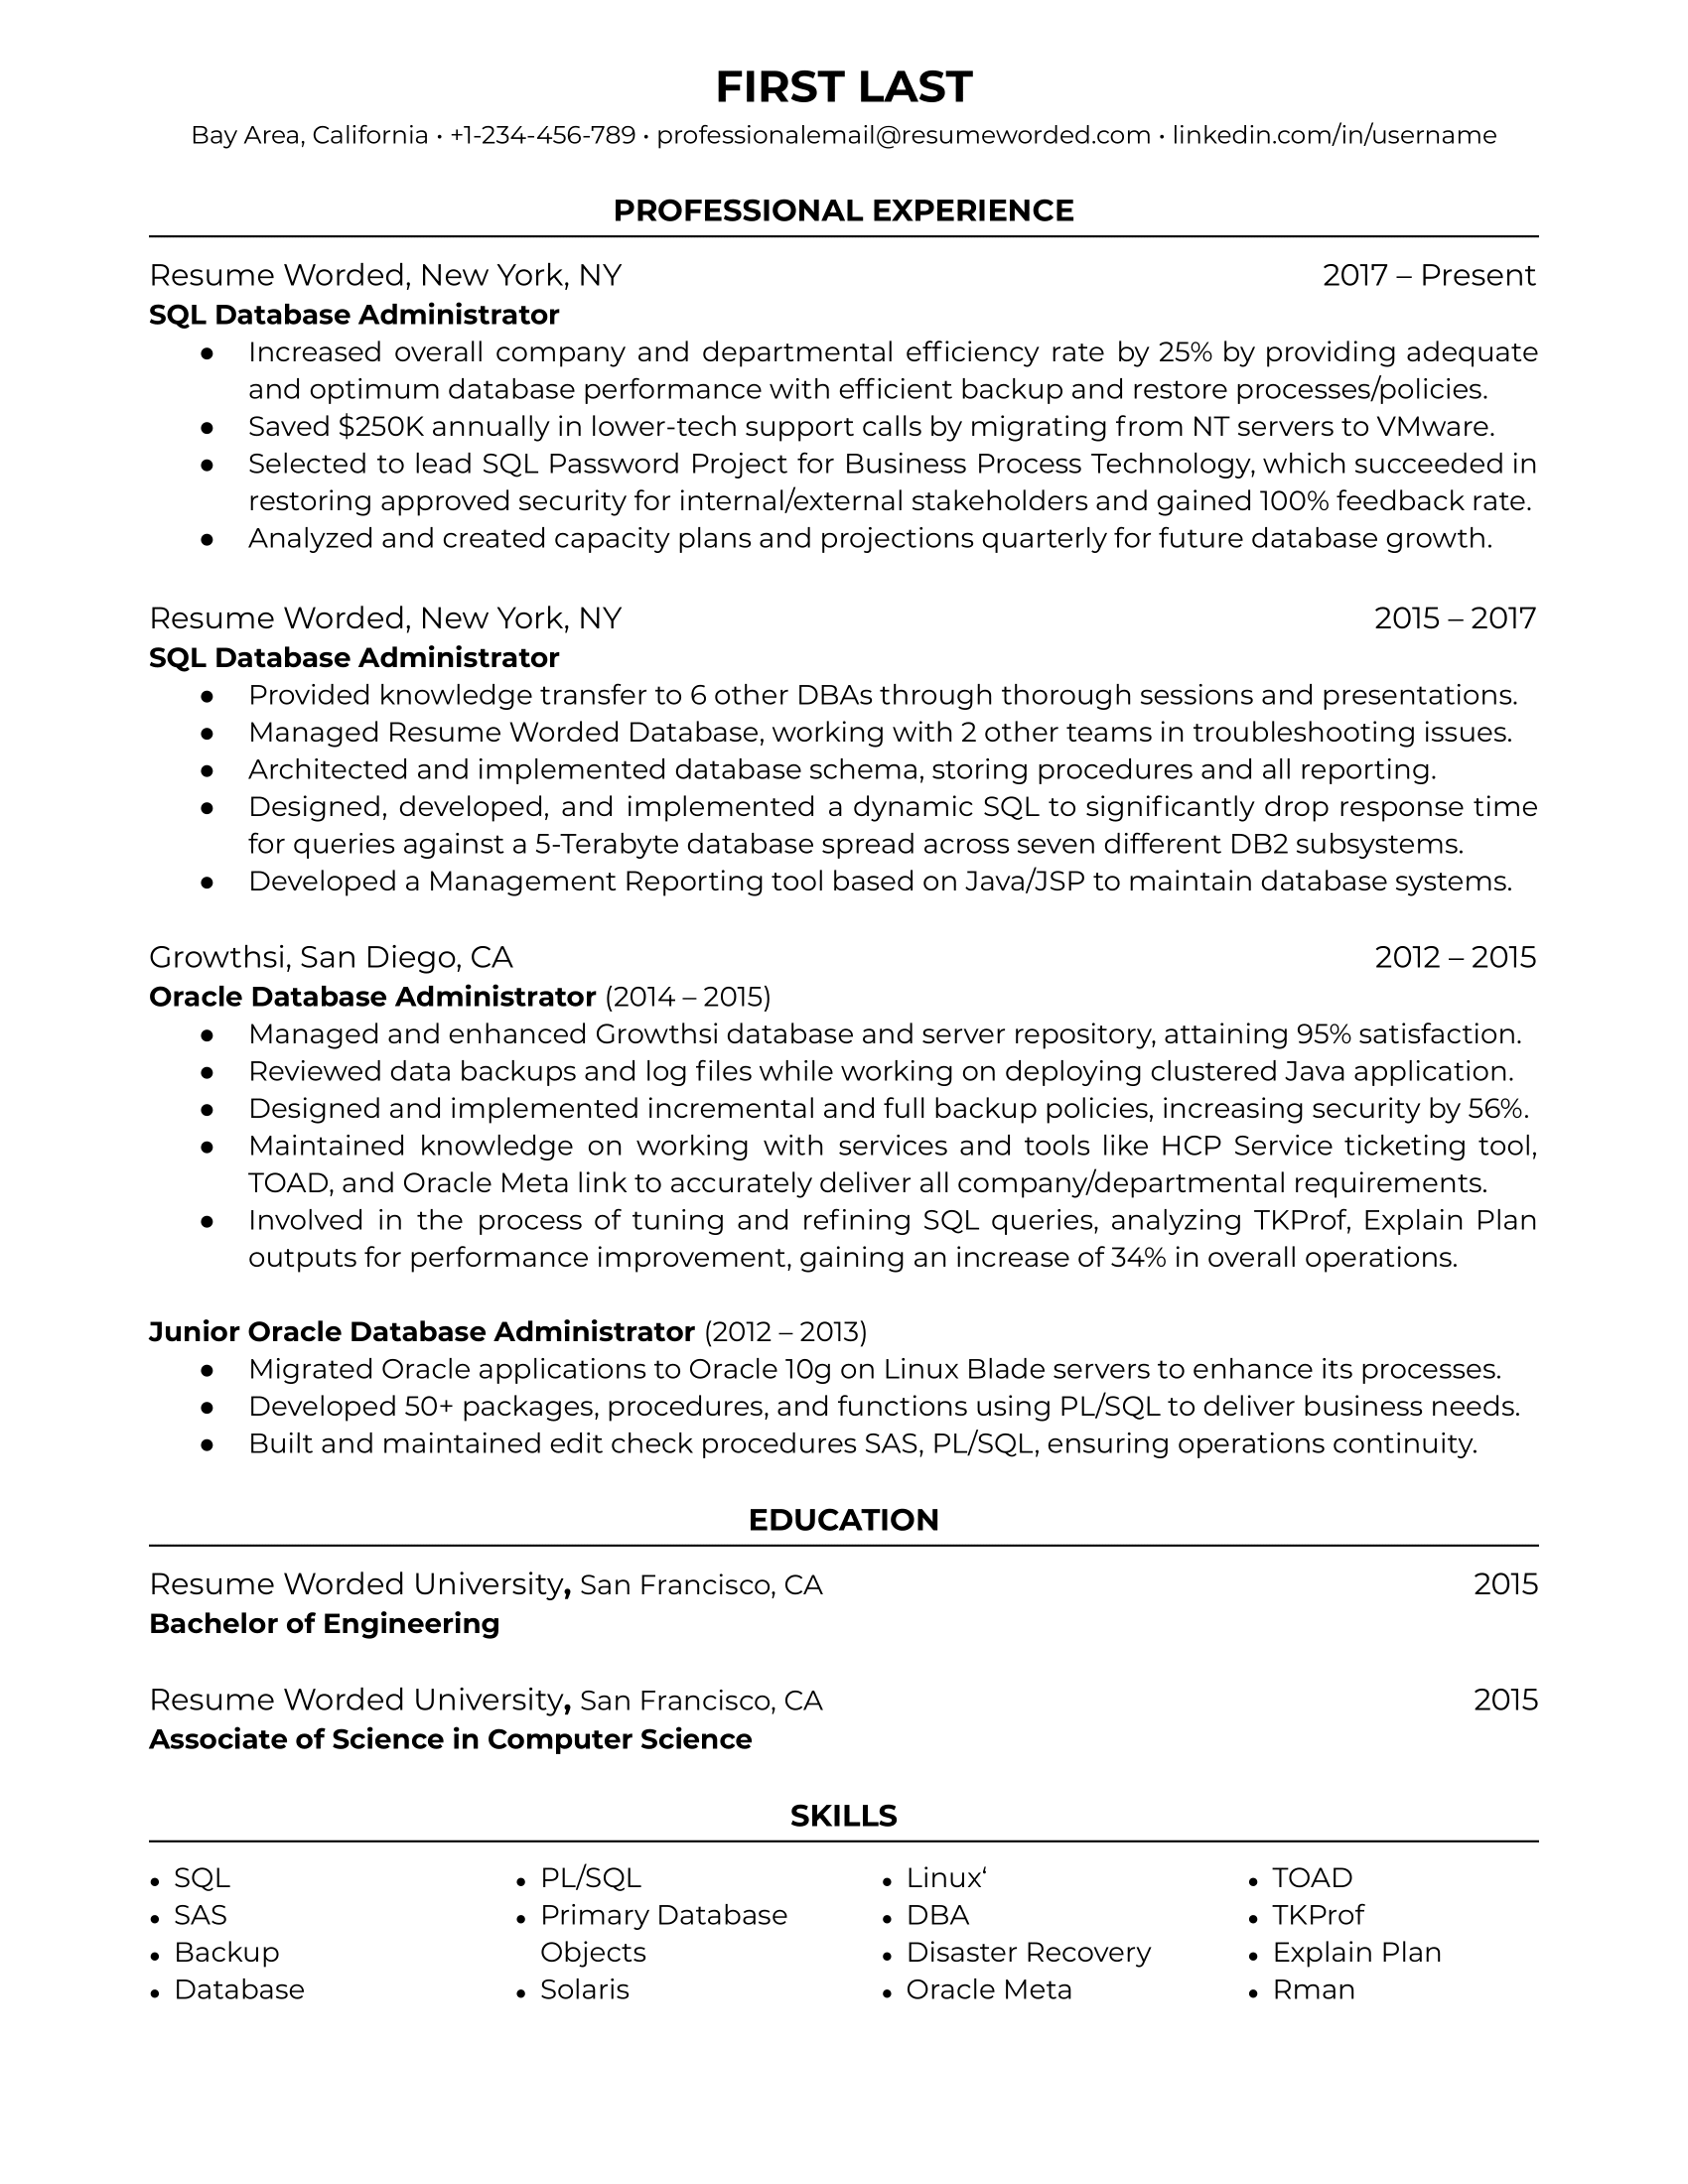 SQL Database Administrator Resume Template + Example